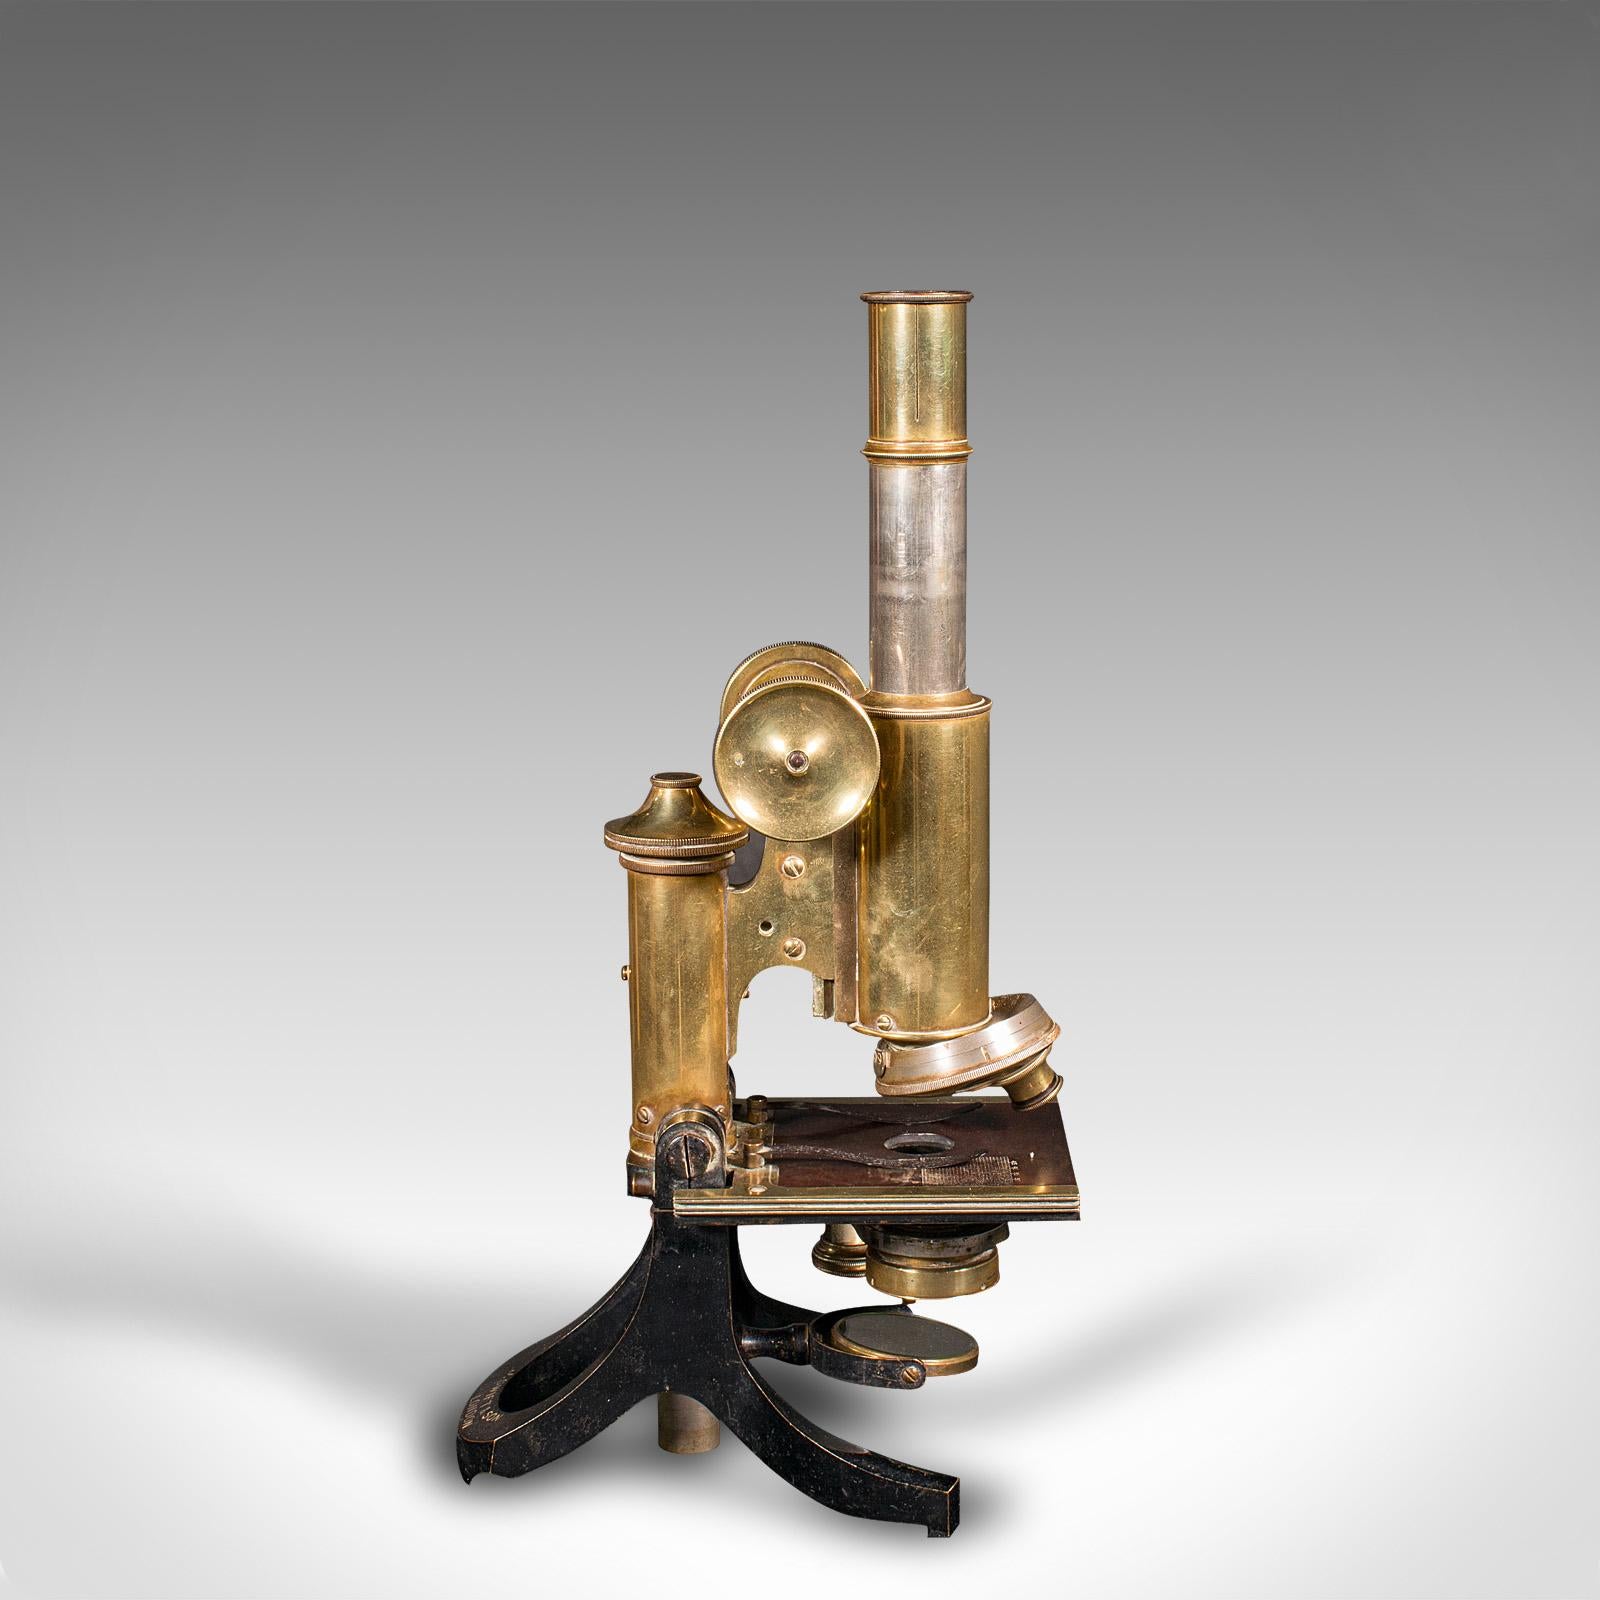 who invented the microscope